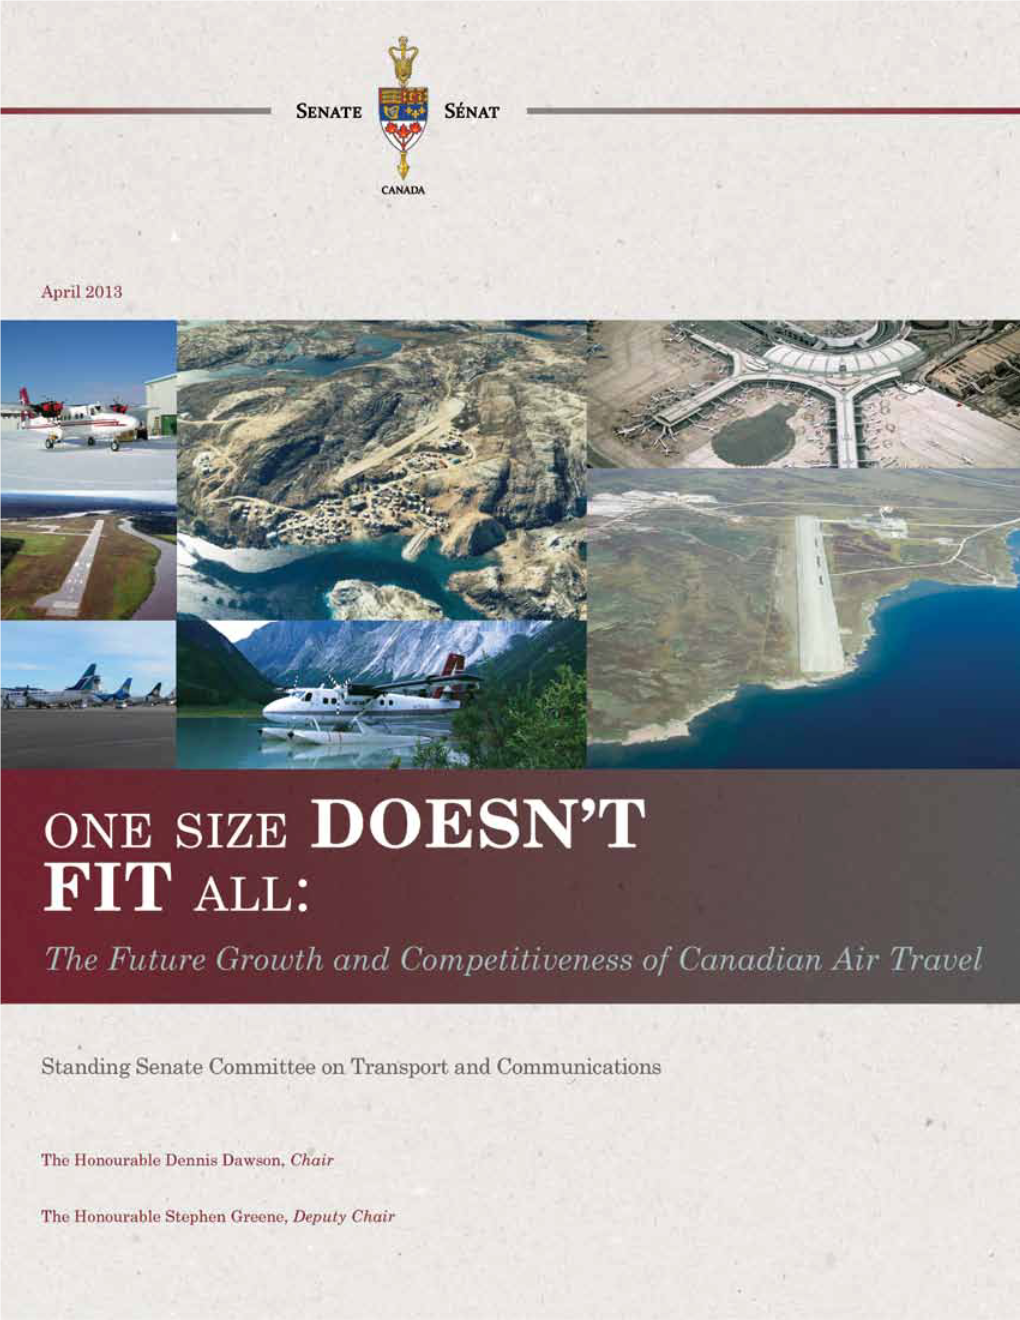 The Future Growth and Competitiveness of Canadian Air